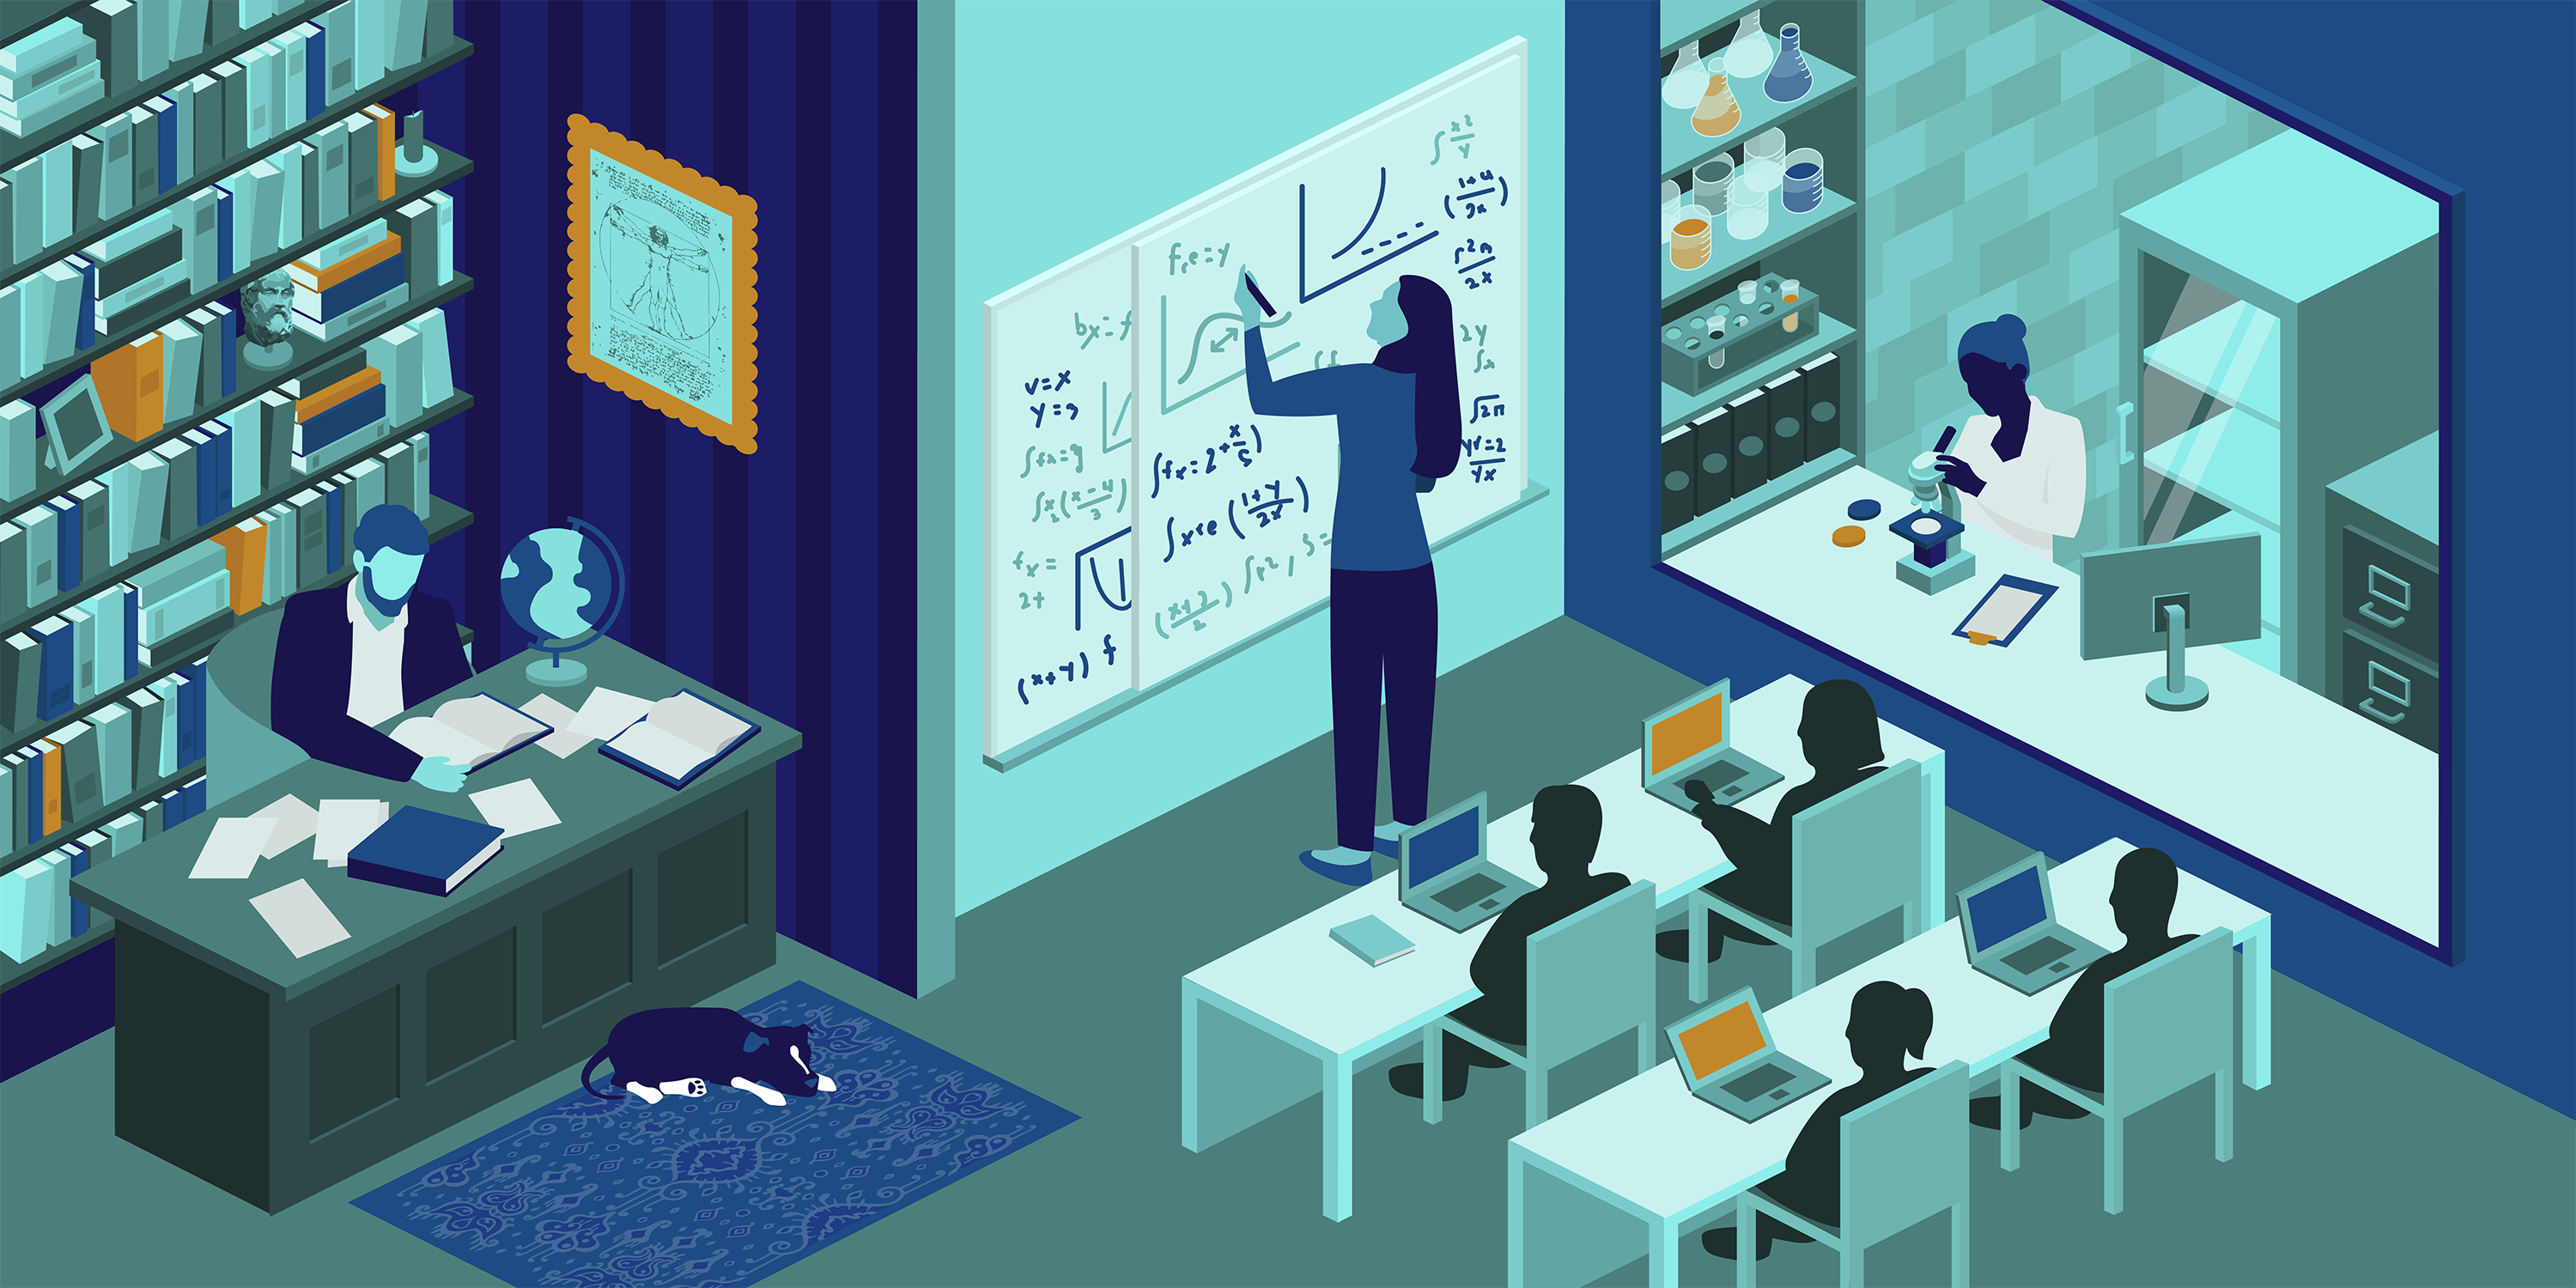 Illustration of three figures. One working at a desk with a large bookshelf in the background, one writing on a whiteboard in front of a classroom, and one doing experiments in a lab.